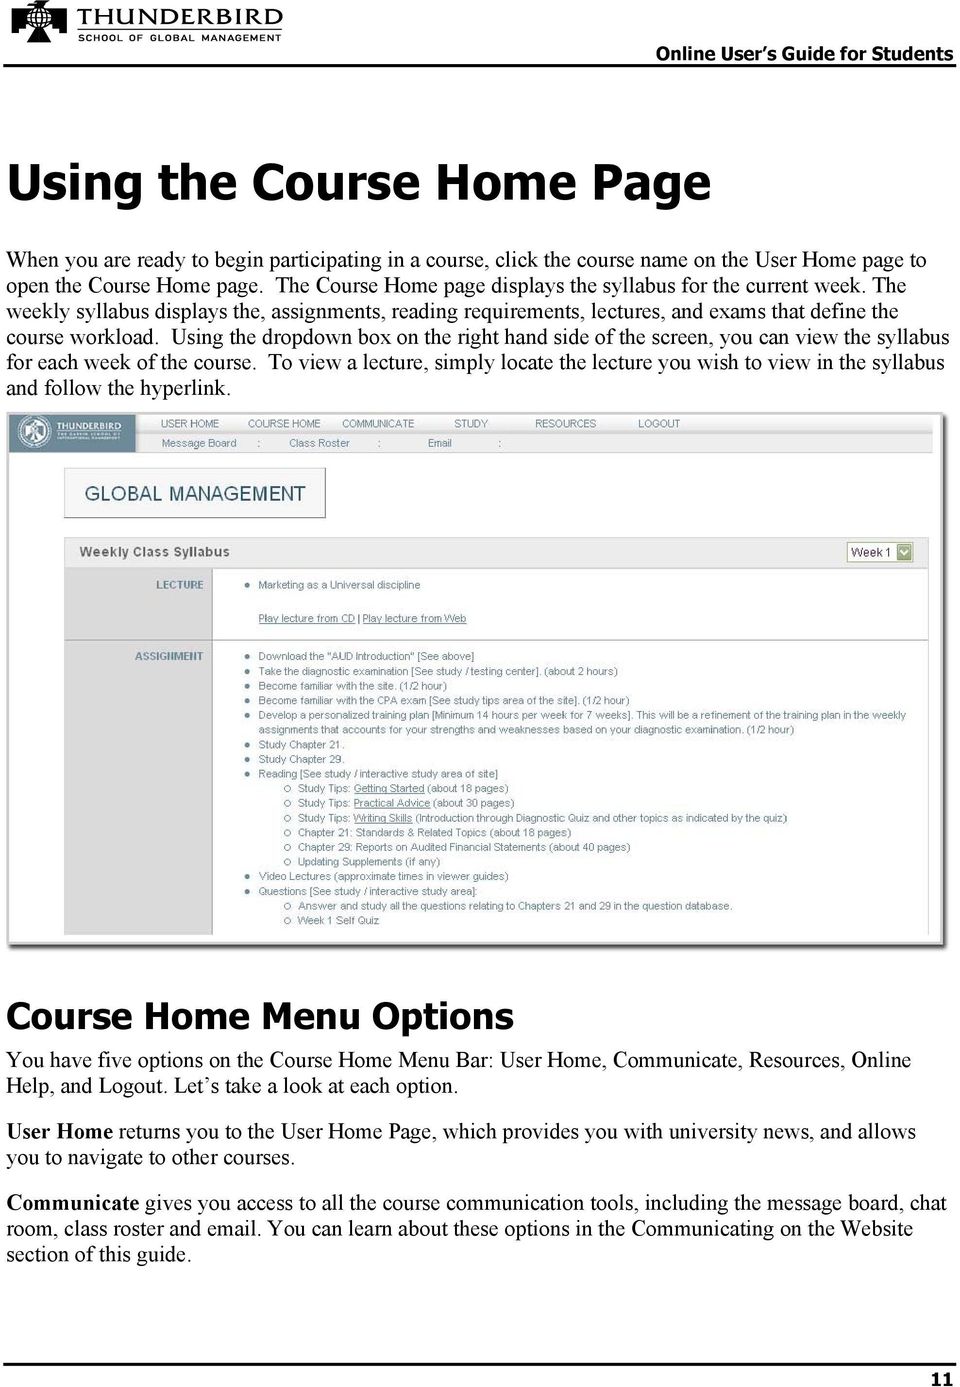 Using the dropdown box on the right hand side of the screen, you can view the syllabus for each week of the course.